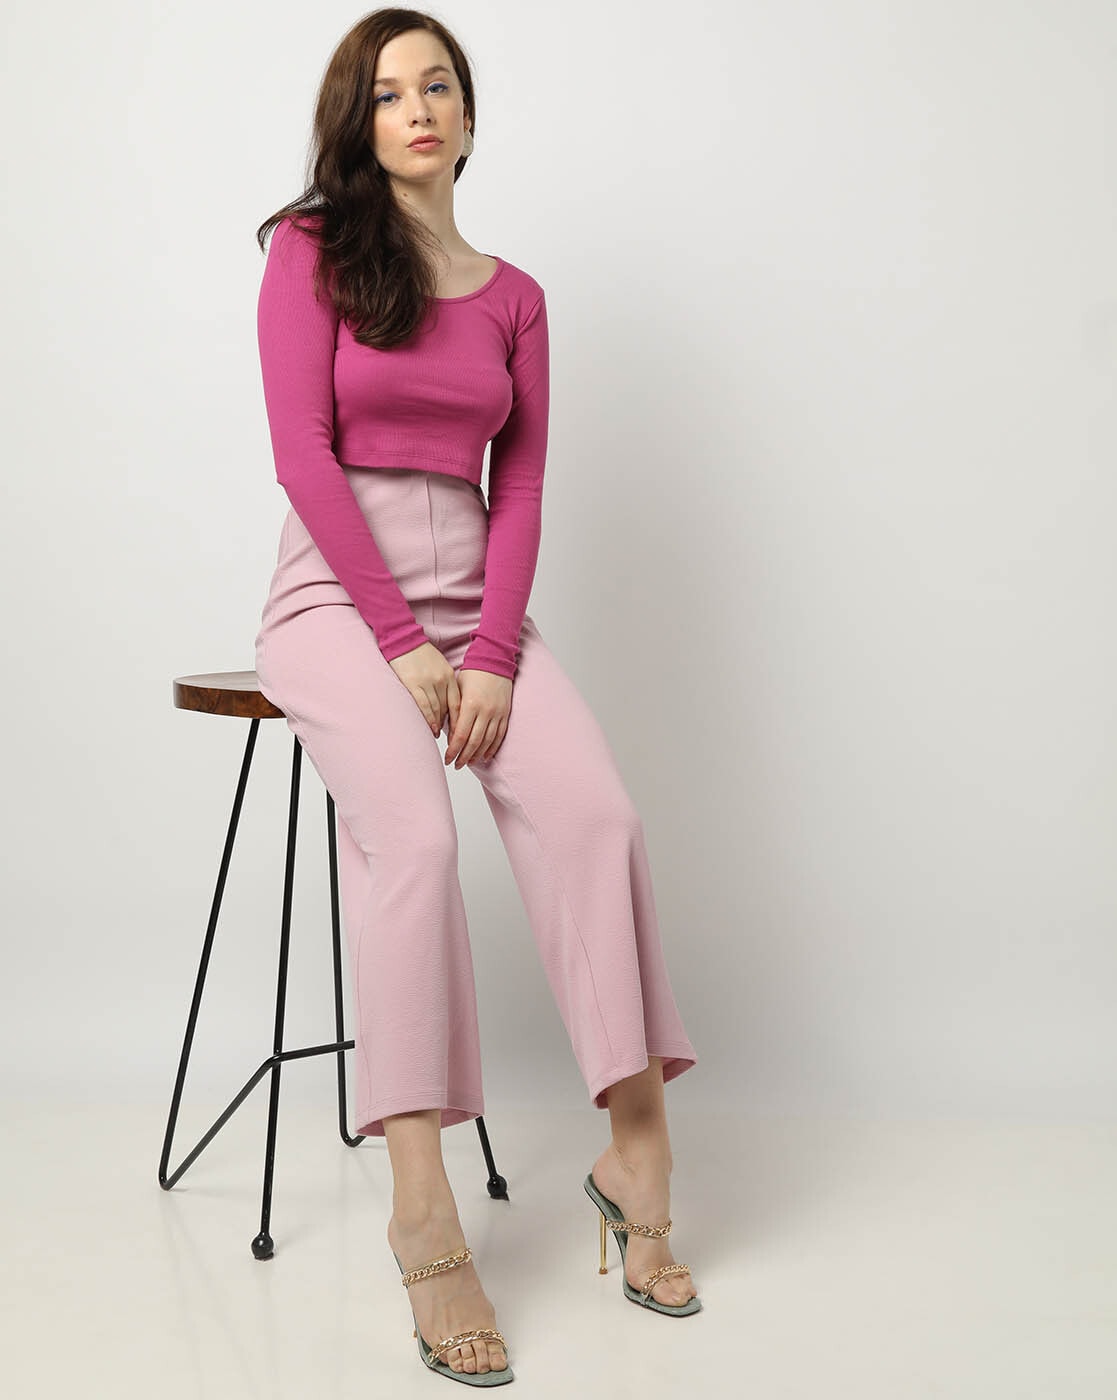 Women's Trousers | New Collection Online | ZARA United Kingdom | Flowy  pants outfit, Flowy pants, High waisted flowy pants